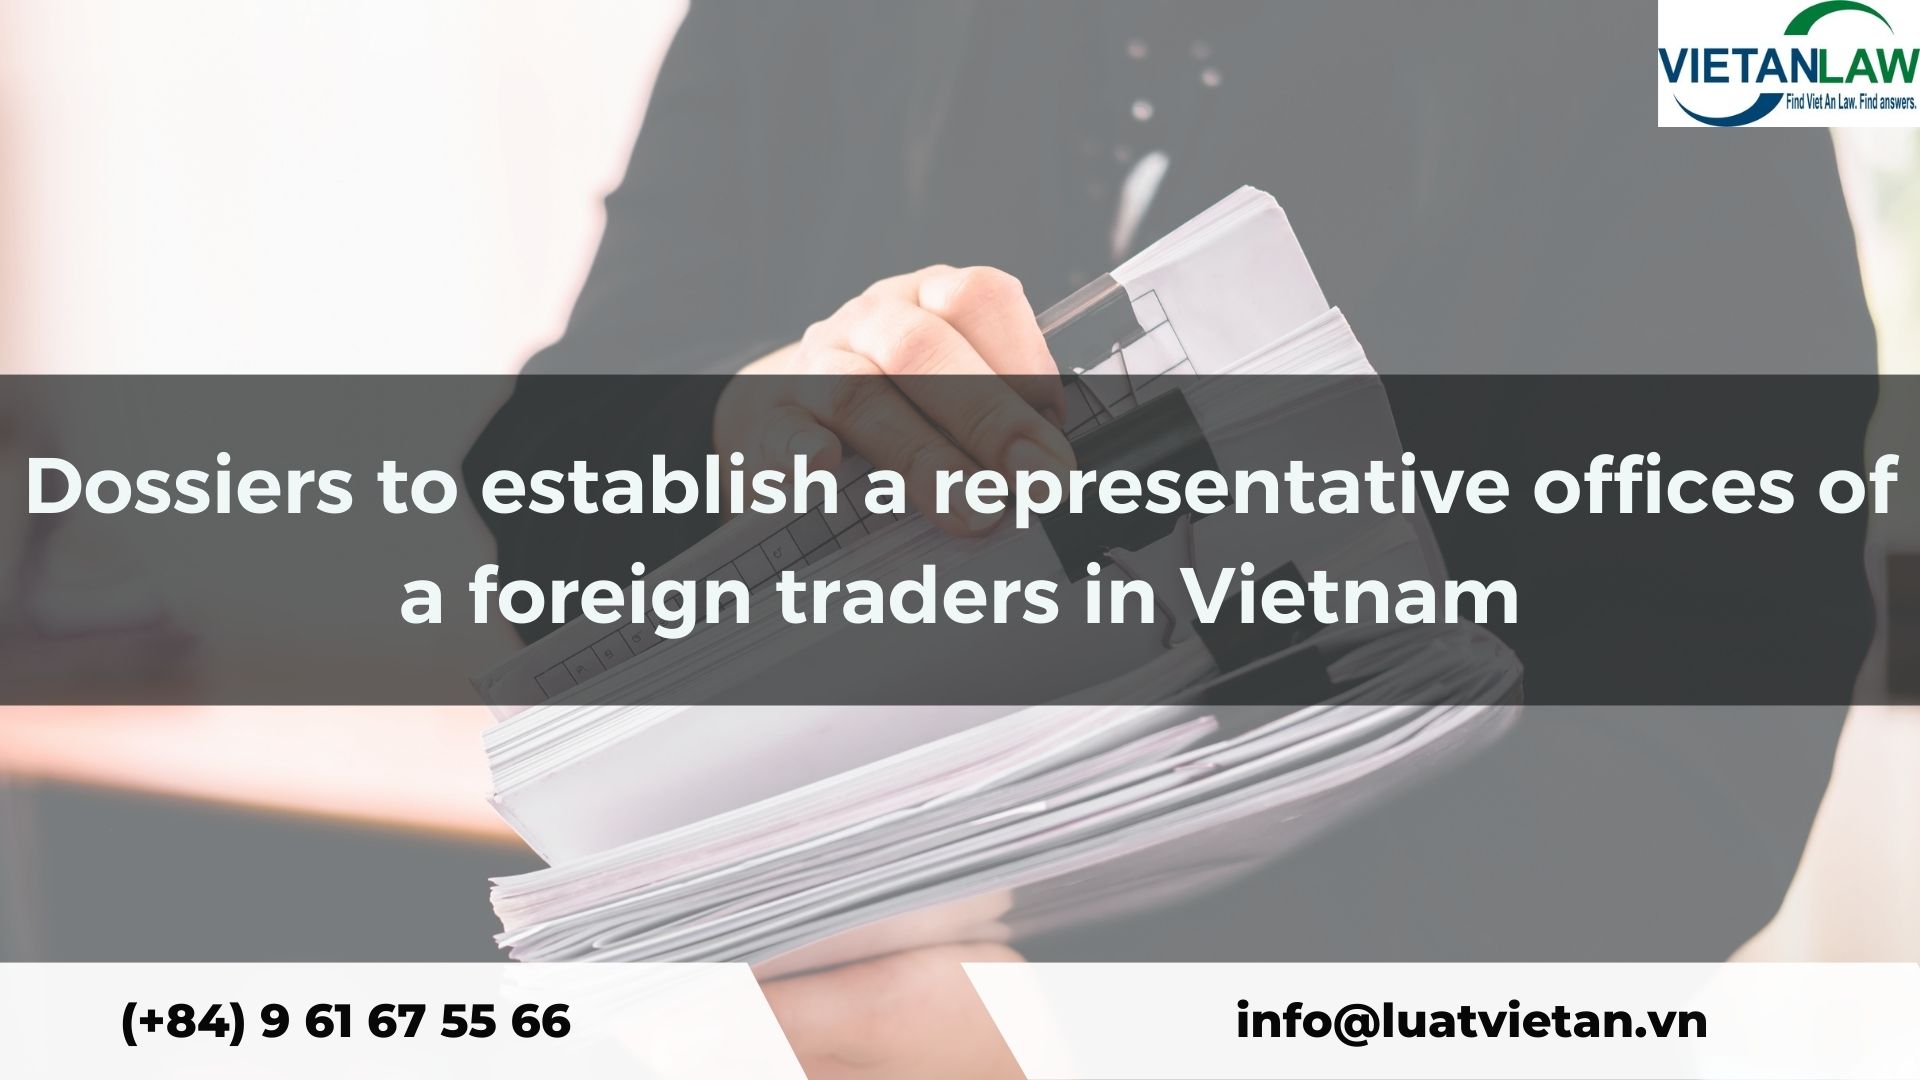 Dossiers to establish a representative offices of a foreign traders in Vietnam